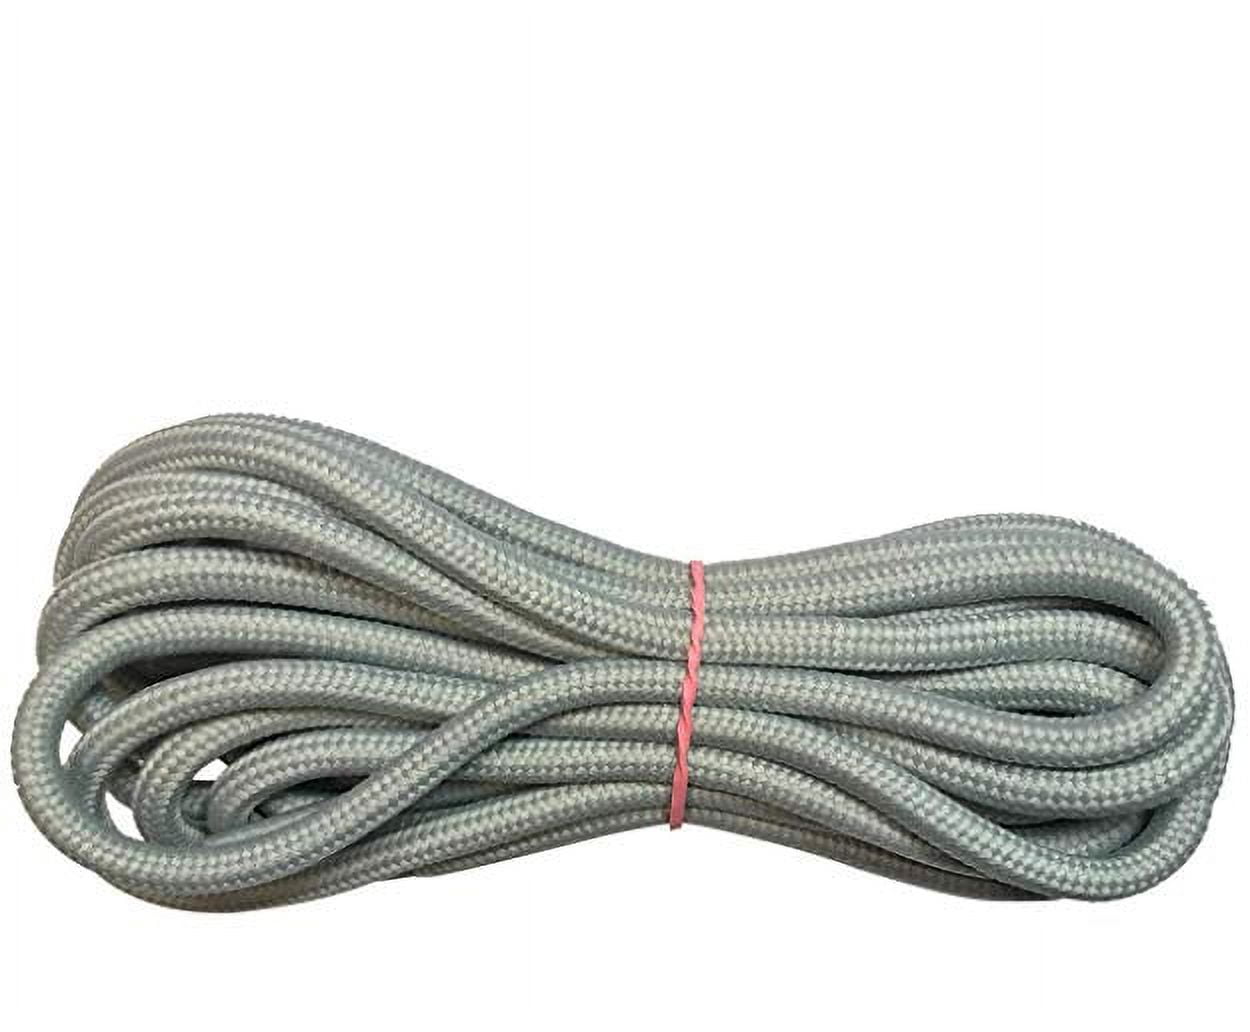 Bu0026Q 2 Pairs Gray Round Boot laces Shoelaces Strings Replacements for Hiking  Work Boots Shoes 36 39 40 48 54 60 63 72 Inches